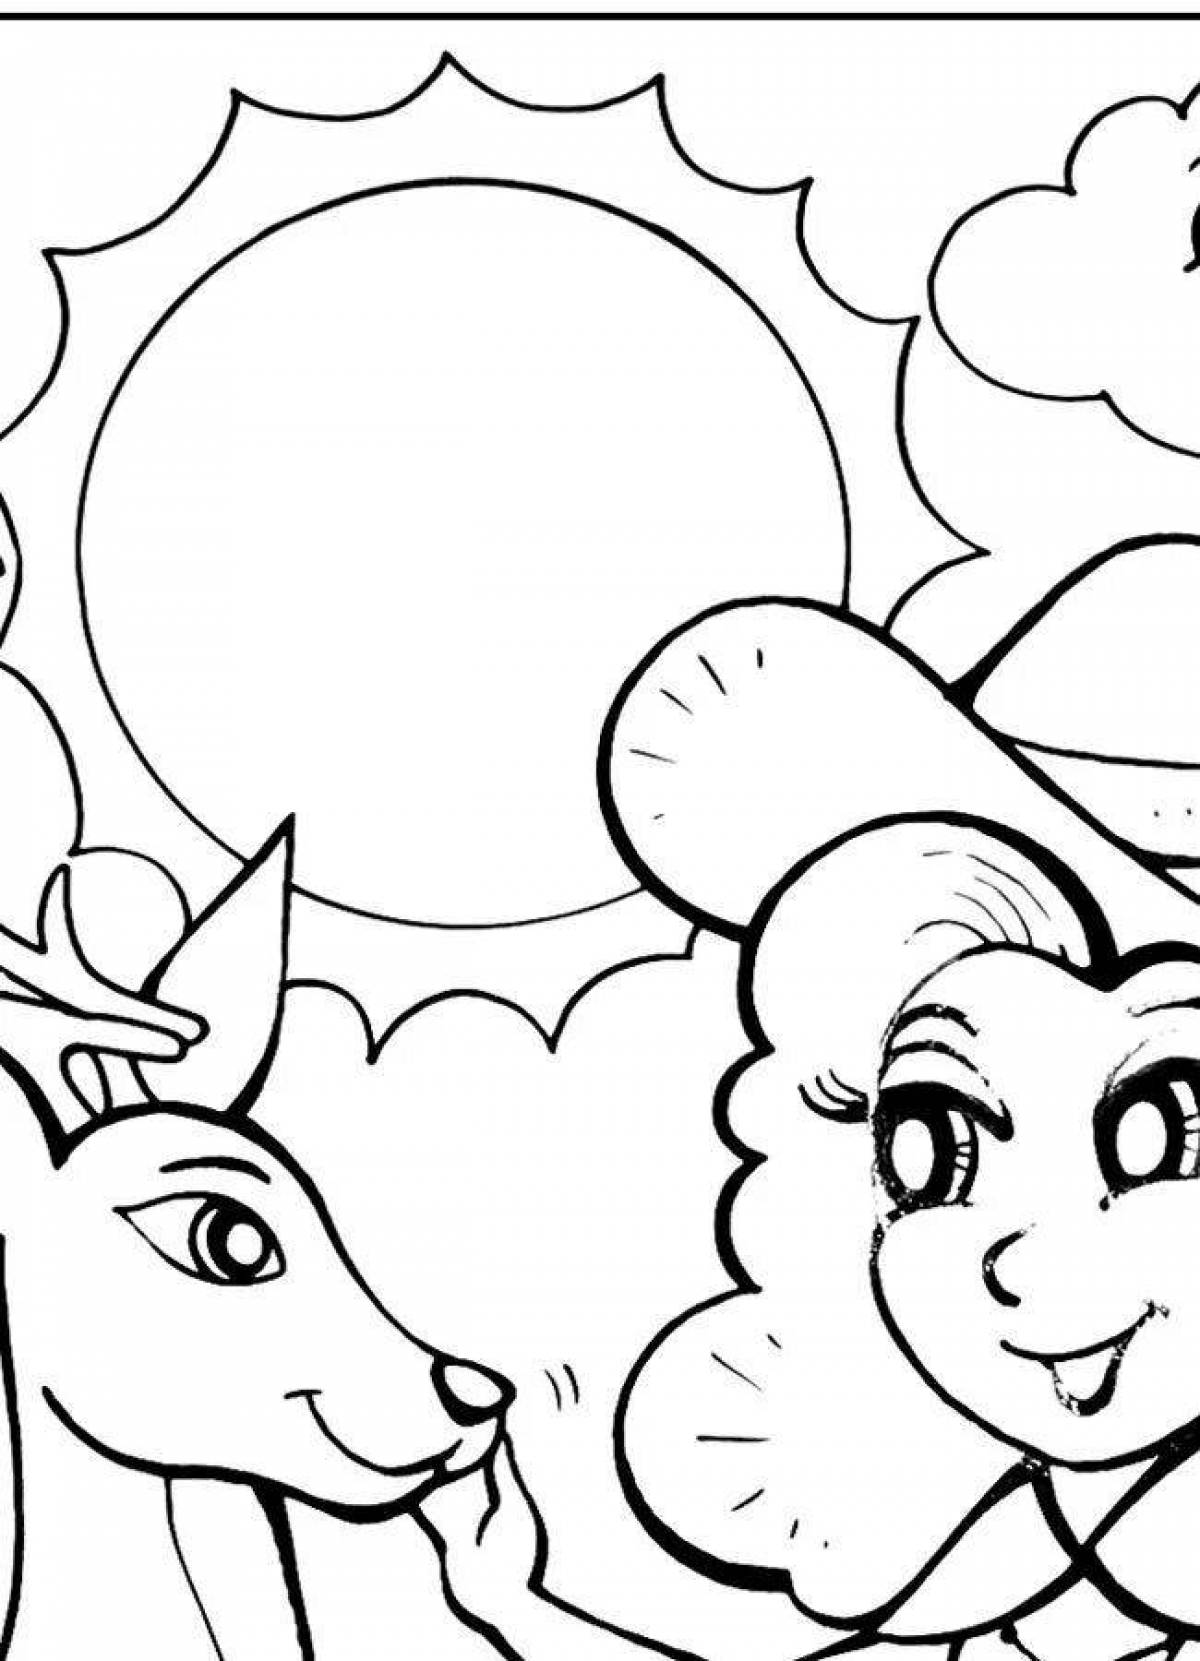 Fun mega and glue coloring page for kids